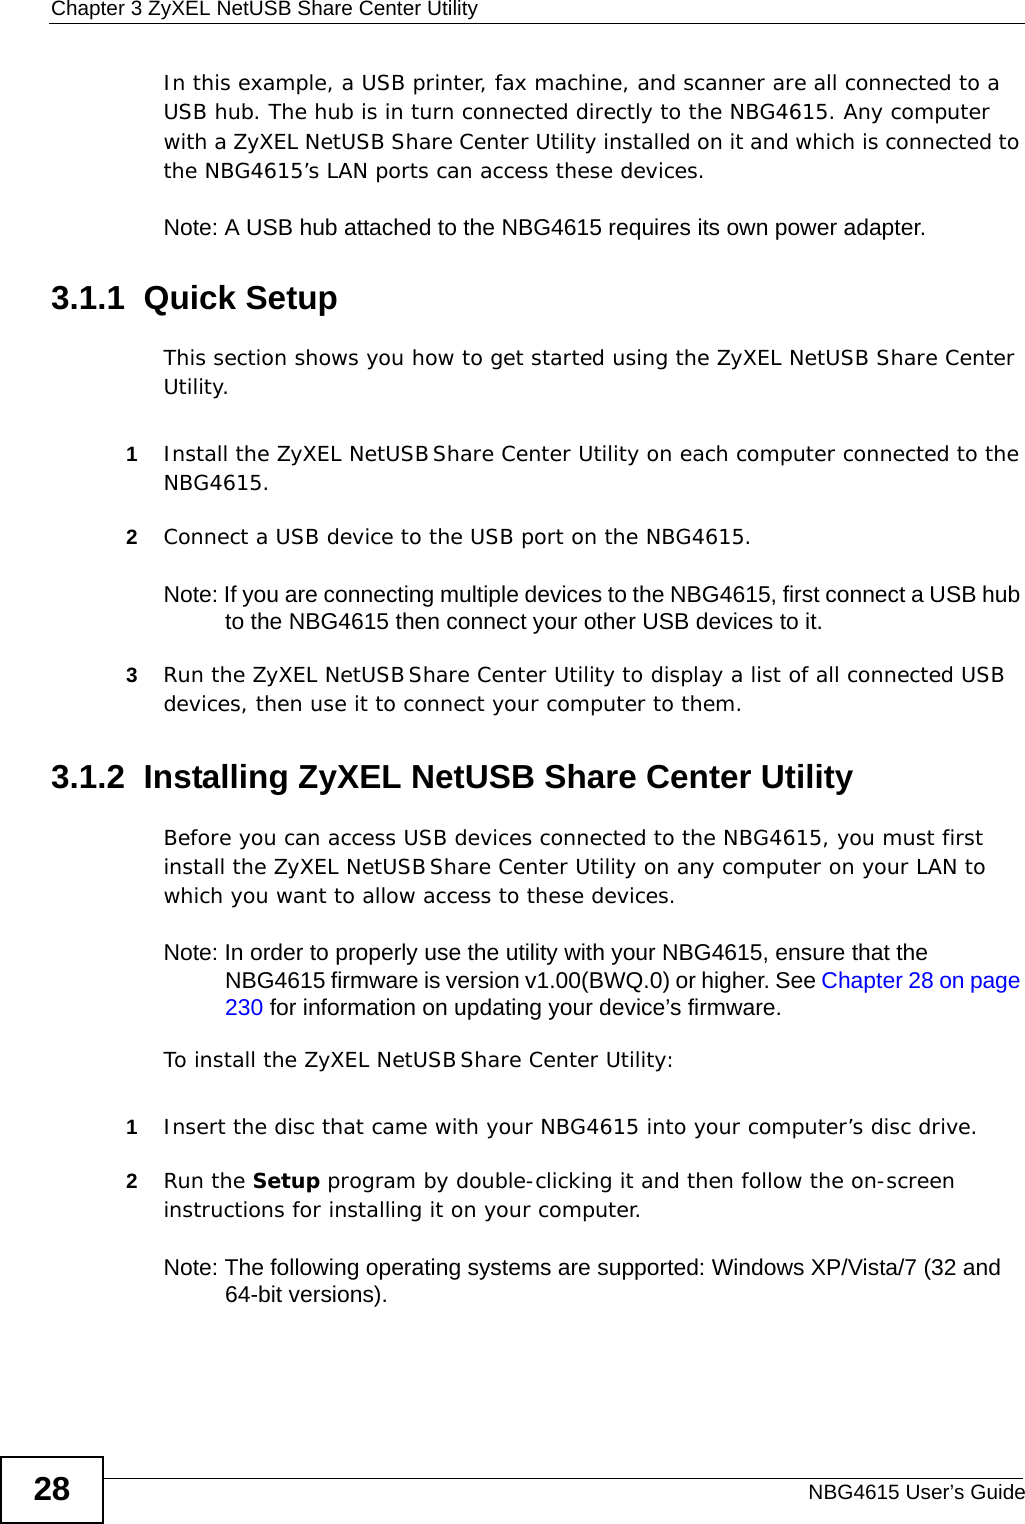 Chapter 3 ZyXEL NetUSB Share Center UtilityNBG4615 User’s Guide28In this example, a USB printer, fax machine, and scanner are all connected to a USB hub. The hub is in turn connected directly to the NBG4615. Any computer with a ZyXEL NetUSB Share Center Utility installed on it and which is connected to the NBG4615’s LAN ports can access these devices.Note: A USB hub attached to the NBG4615 requires its own power adapter.3.1.1  Quick SetupThis section shows you how to get started using the ZyXEL NetUSB Share Center Utility.1Install the ZyXEL NetUSB Share Center Utility on each computer connected to the NBG4615.2Connect a USB device to the USB port on the NBG4615. Note: If you are connecting multiple devices to the NBG4615, first connect a USB hub to the NBG4615 then connect your other USB devices to it.3Run the ZyXEL NetUSB Share Center Utility to display a list of all connected USB devices, then use it to connect your computer to them.3.1.2  Installing ZyXEL NetUSB Share Center UtilityBefore you can access USB devices connected to the NBG4615, you must first install the ZyXEL NetUSB Share Center Utility on any computer on your LAN to which you want to allow access to these devices.Note: In order to properly use the utility with your NBG4615, ensure that the NBG4615 firmware is version v1.00(BWQ.0) or higher. See Chapter 28 on page 230 for information on updating your device’s firmware.To install the ZyXEL NetUSB Share Center Utility:1Insert the disc that came with your NBG4615 into your computer’s disc drive.2Run the Setup program by double-clicking it and then follow the on-screen instructions for installing it on your computer.Note: The following operating systems are supported: Windows XP/Vista/7 (32 and 64-bit versions).